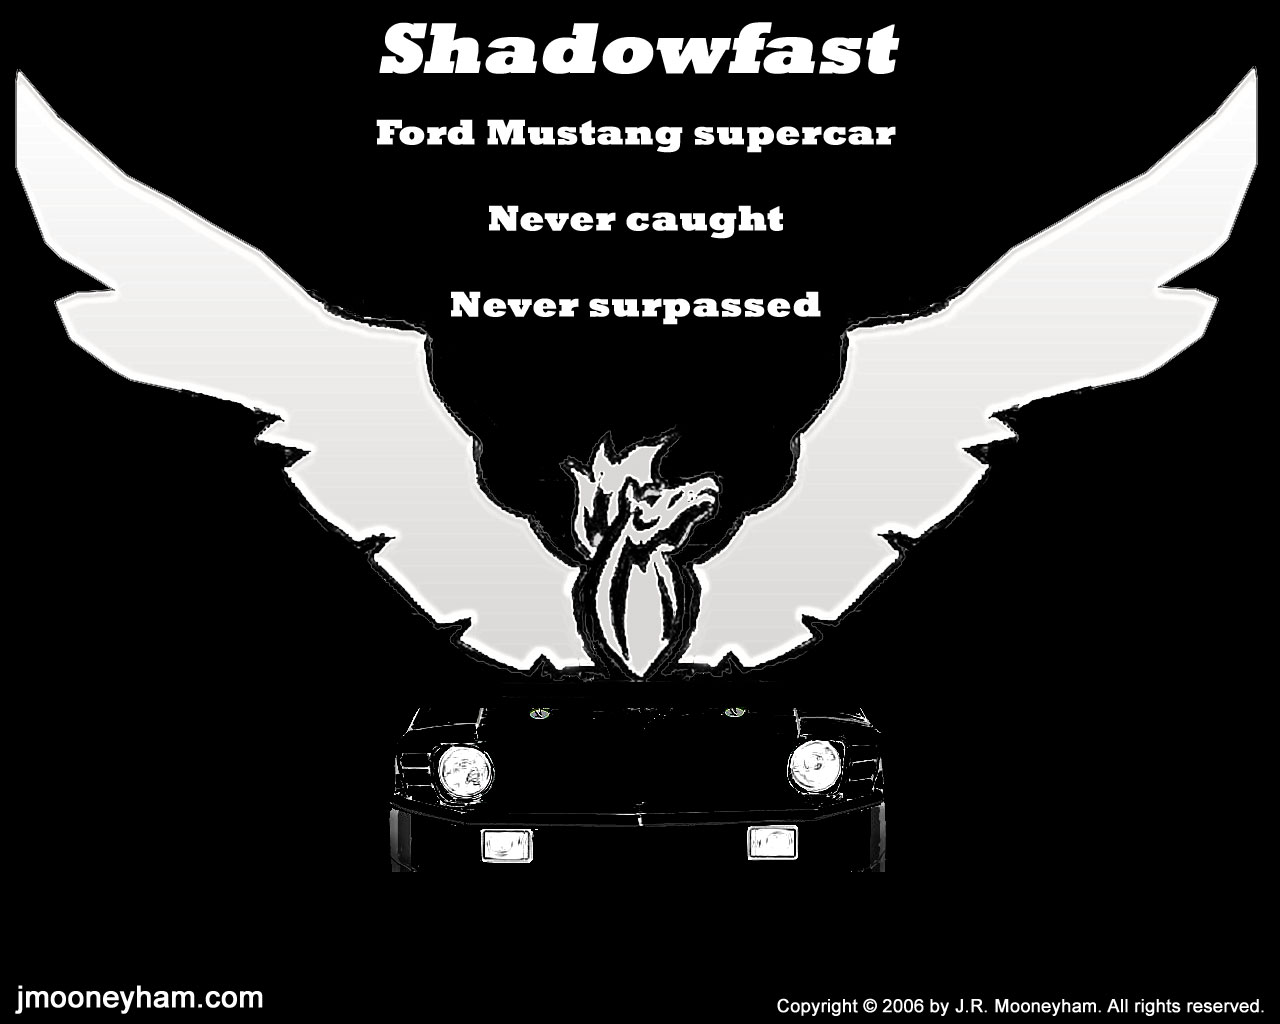 Free 1280x1024 jpeg desktop wallpaper (The ultimate Mustang supercar poster with metallic spread wings stallion decal symbol)